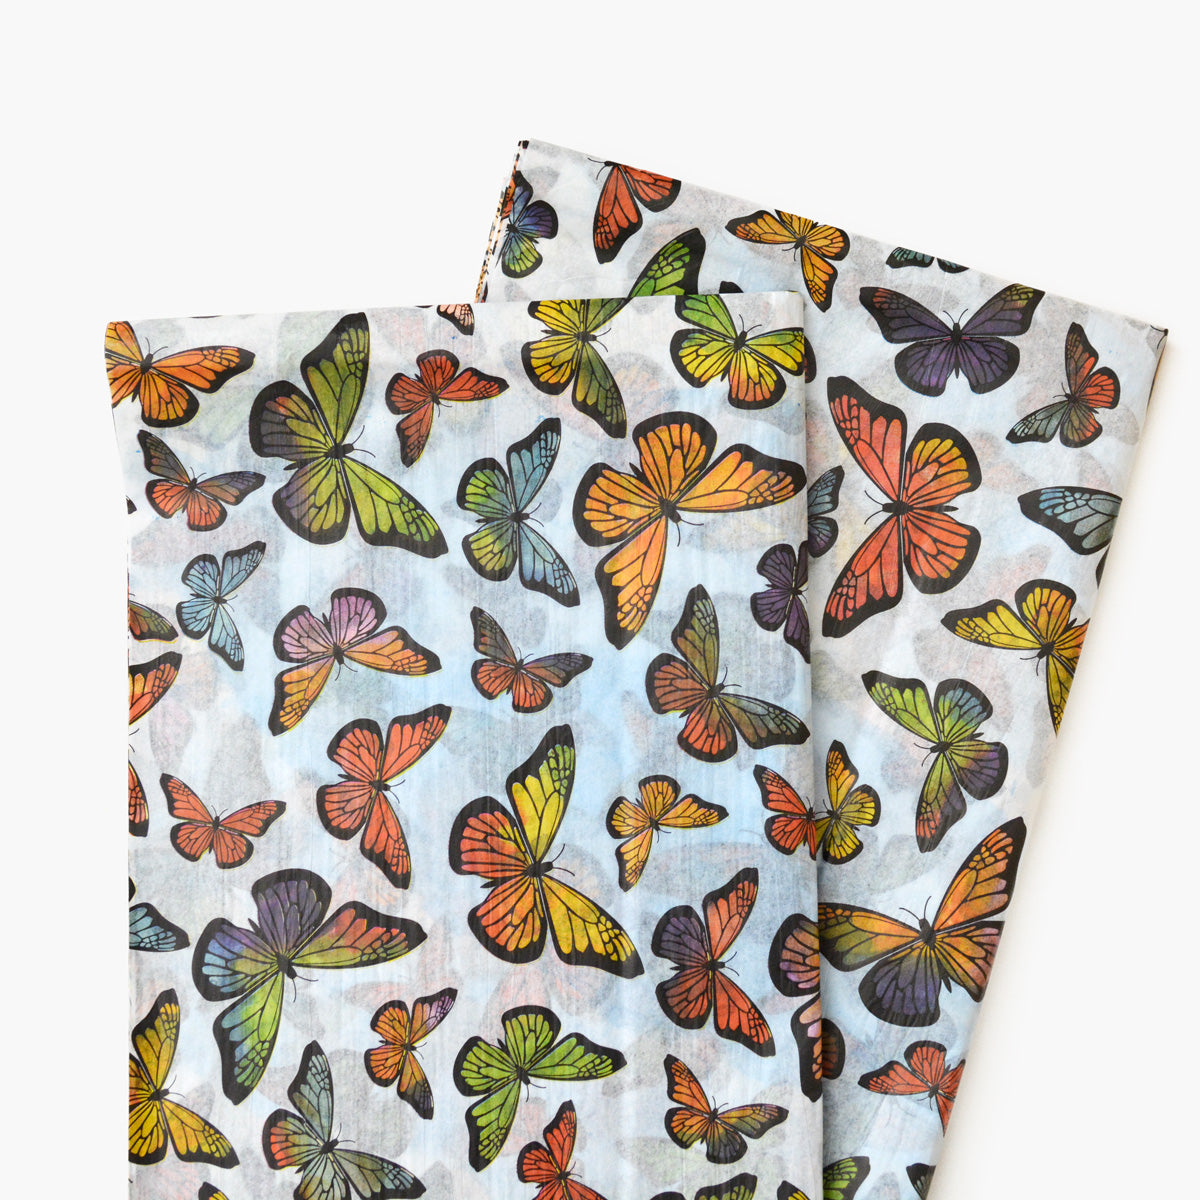 Butterflies Tissue Paper - Butterfly Pattern Paper, Christmas Gift Wrapping for Girls, Holiday Wrap Paper, Spring Garden Craft Supplies GenWoo Shop